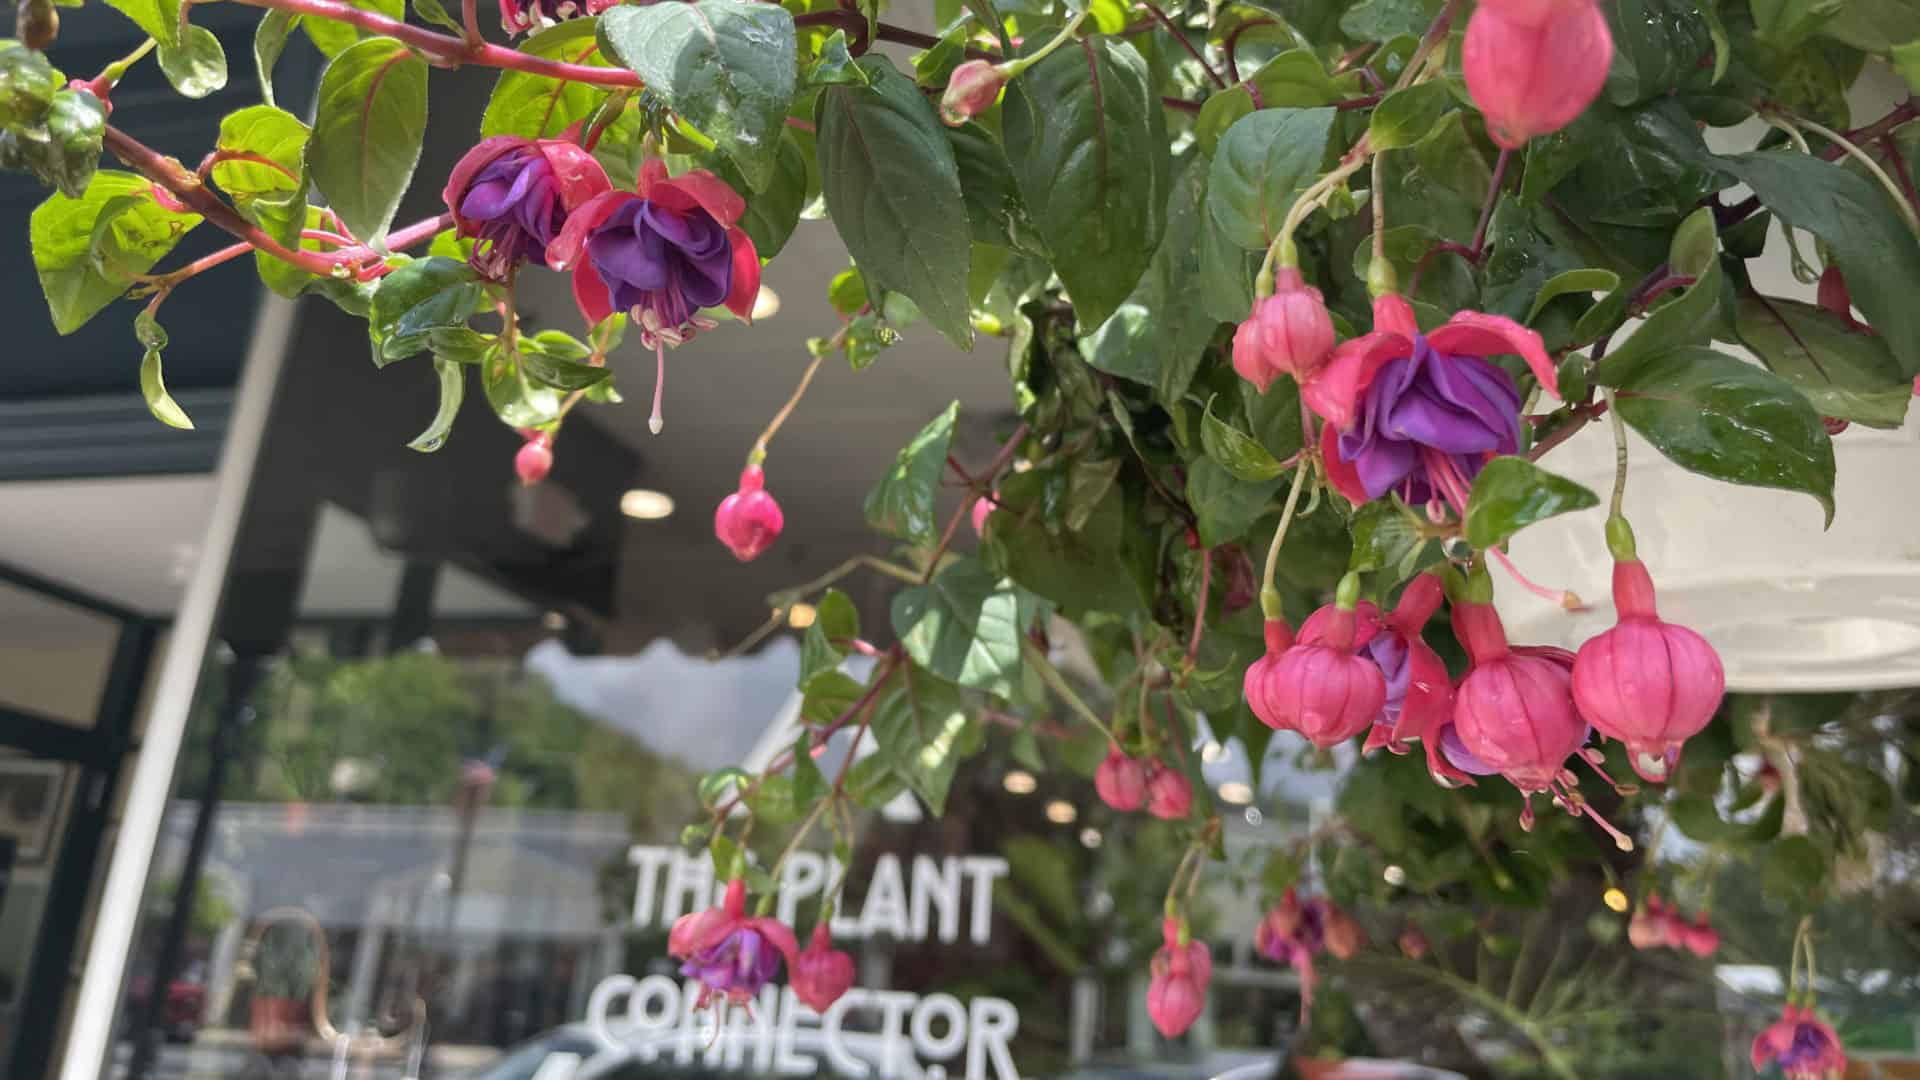 A hanging plant shows bright pink and purple petals beside the glass window of the Plant Connector in North Adams.